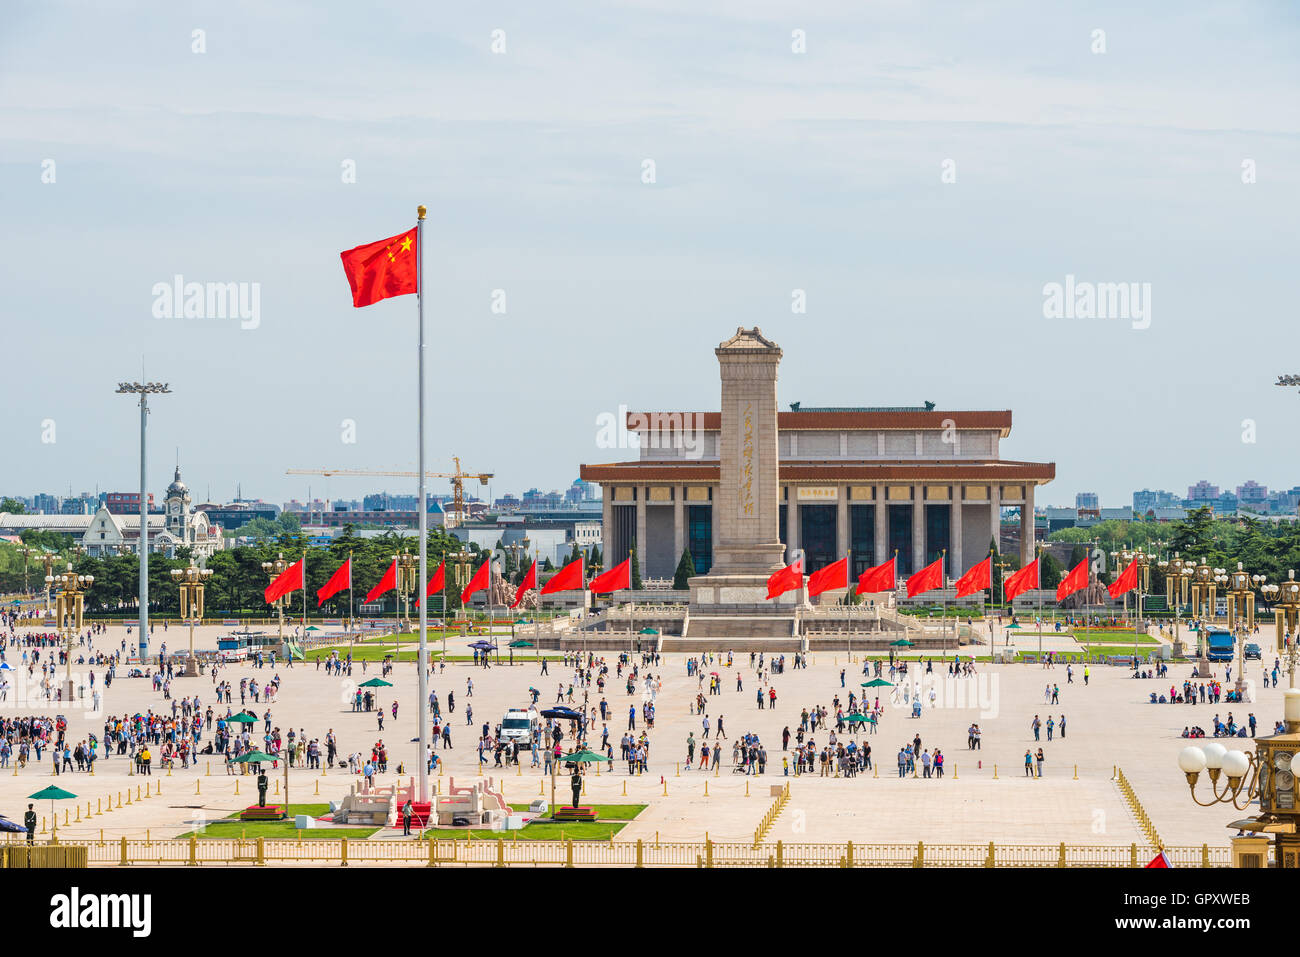 Tiananmen Square, one of the world's largest city square, China landmark location, The Gate of Heavenly Peace in Beijing China Stock Photo